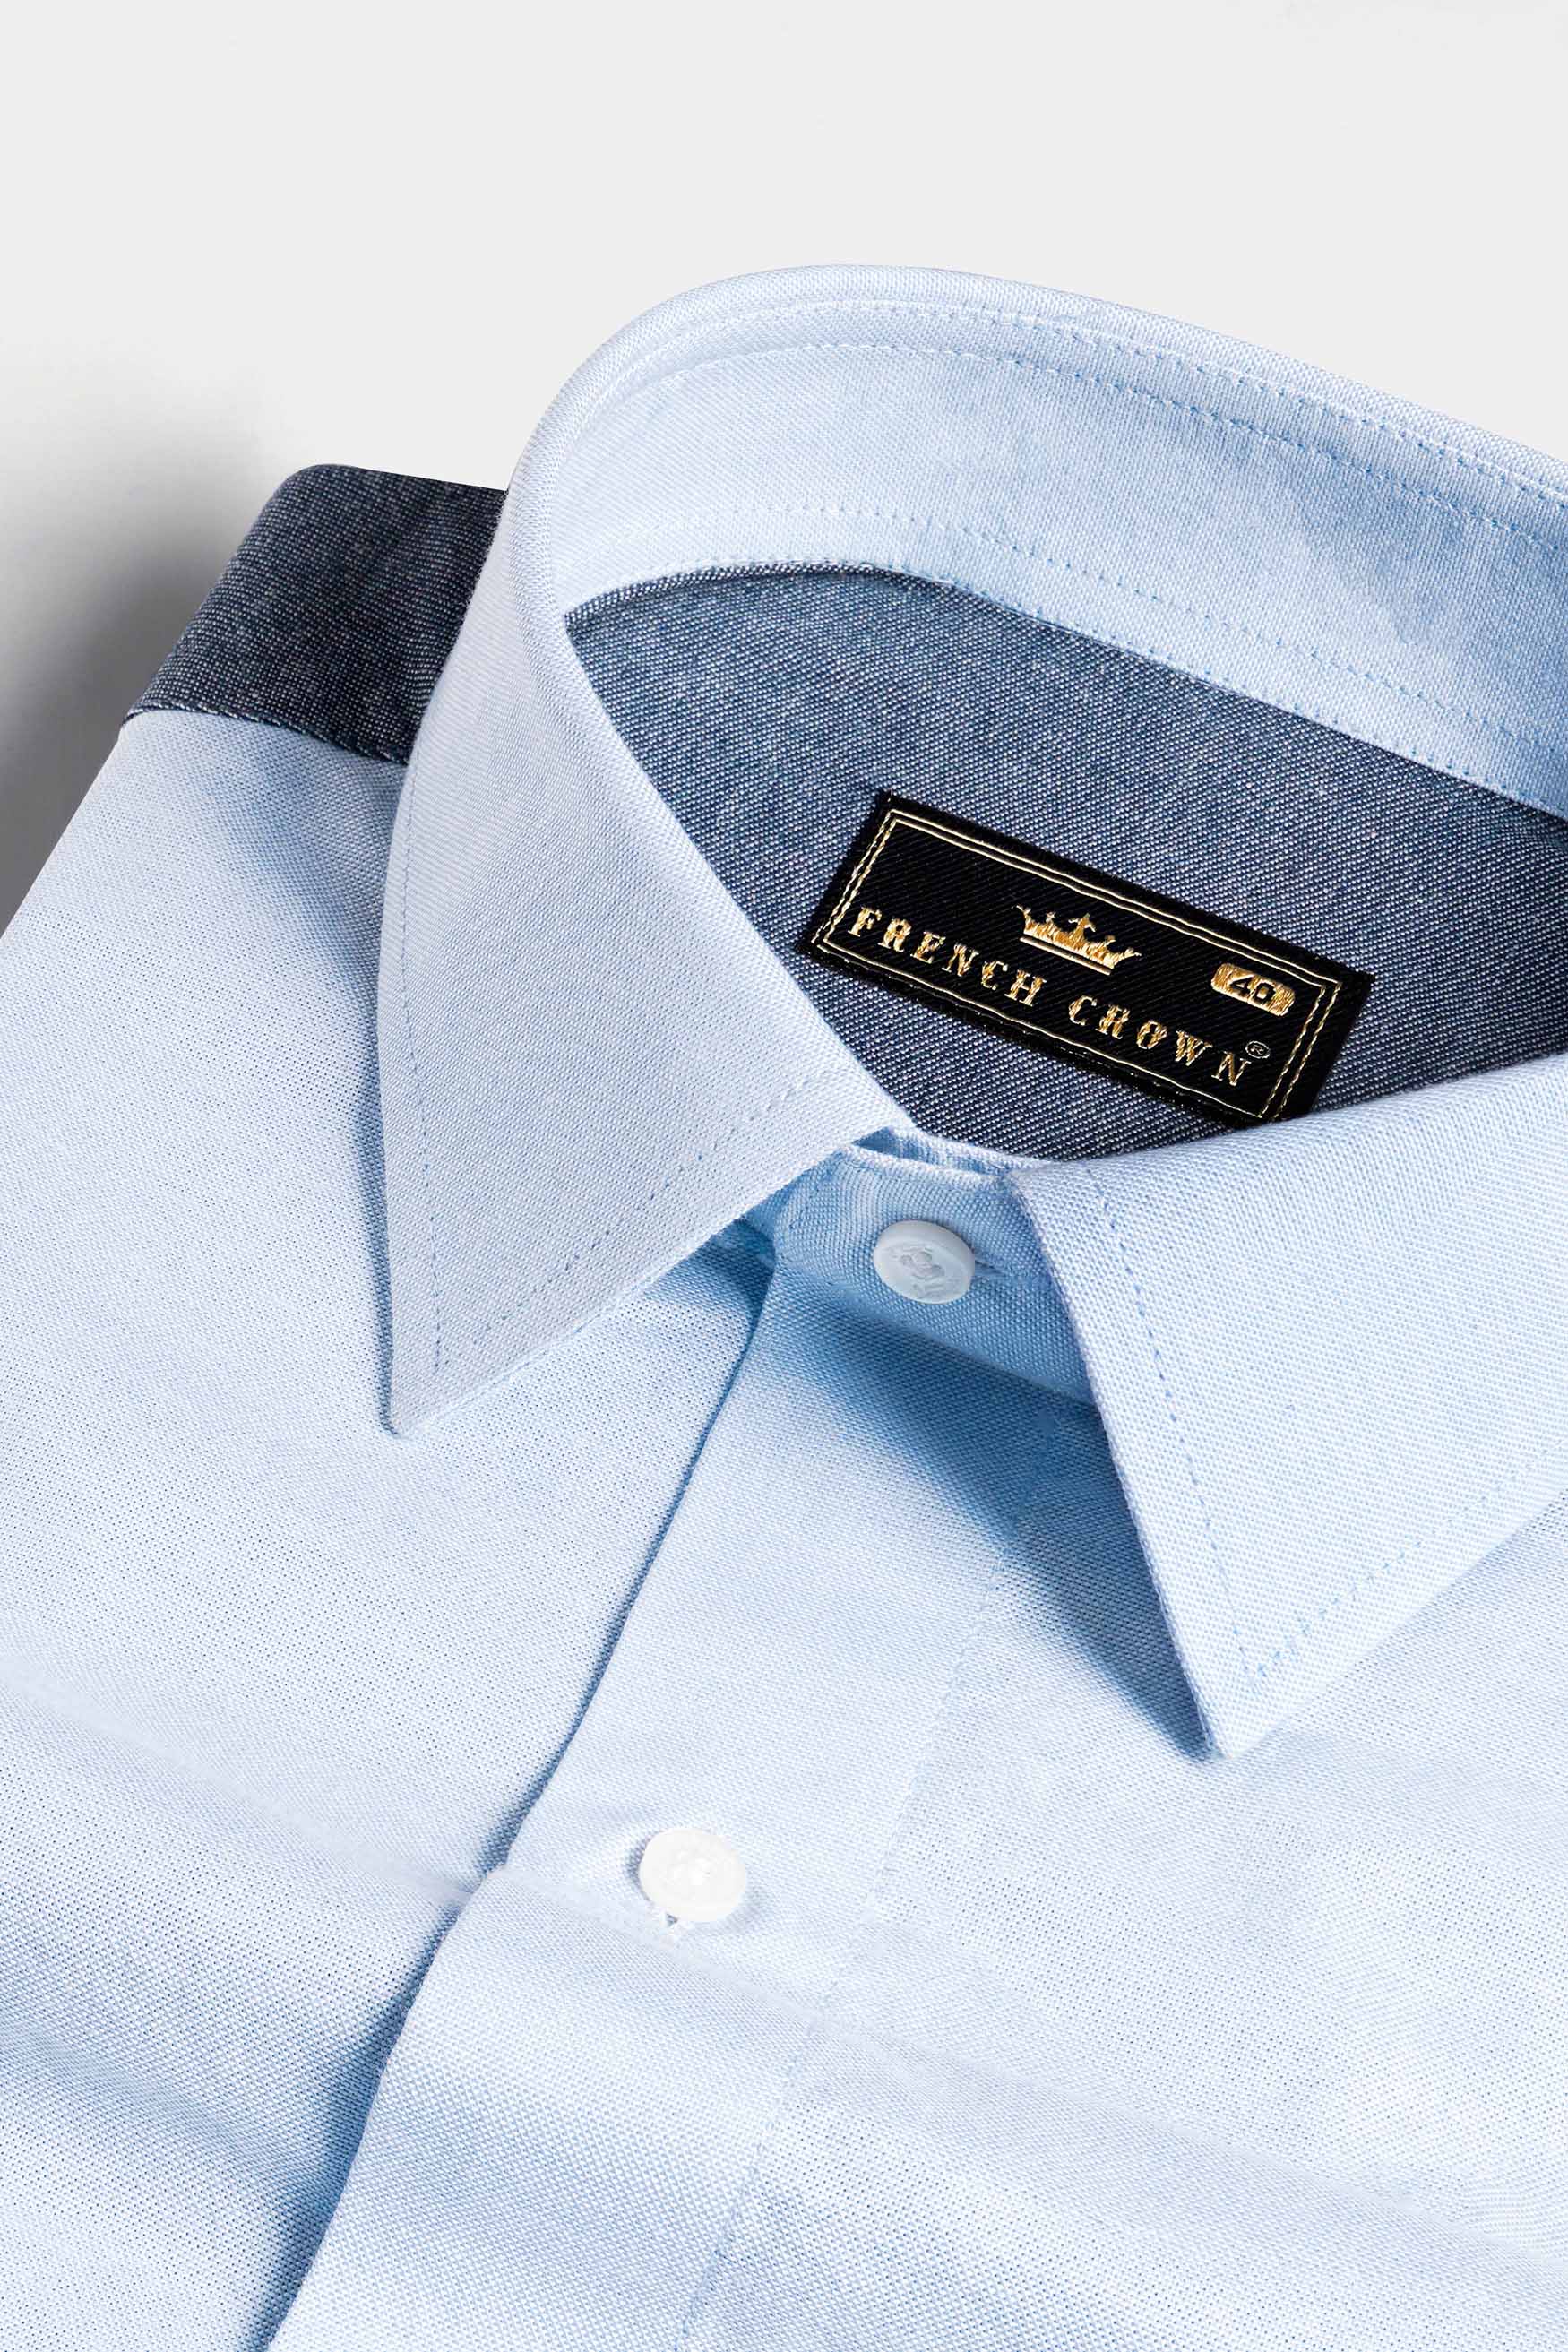 Mercury Blue Hand Painted Royal Oxford Designer Shirt 6479-P290-ART-38, 6479-P290-ART-H-38, 6479-P290-ART-39, 6479-P290-ART-H-39, 6479-P290-ART-40, 6479-P290-ART-H-40, 6479-P290-ART-42, 6479-P290-ART-H-42, 6479-P290-ART-44, 6479-P290-ART-H-44, 6479-P290-ART-46, 6479-P290-ART-H-46, 6479-P290-ART-48, 6479-P290-ART-H-48, 6479-P290-ART-50, 6479-P290-ART-H-50, 6479-P290-ART-52, 6479-P290-ART-H-52